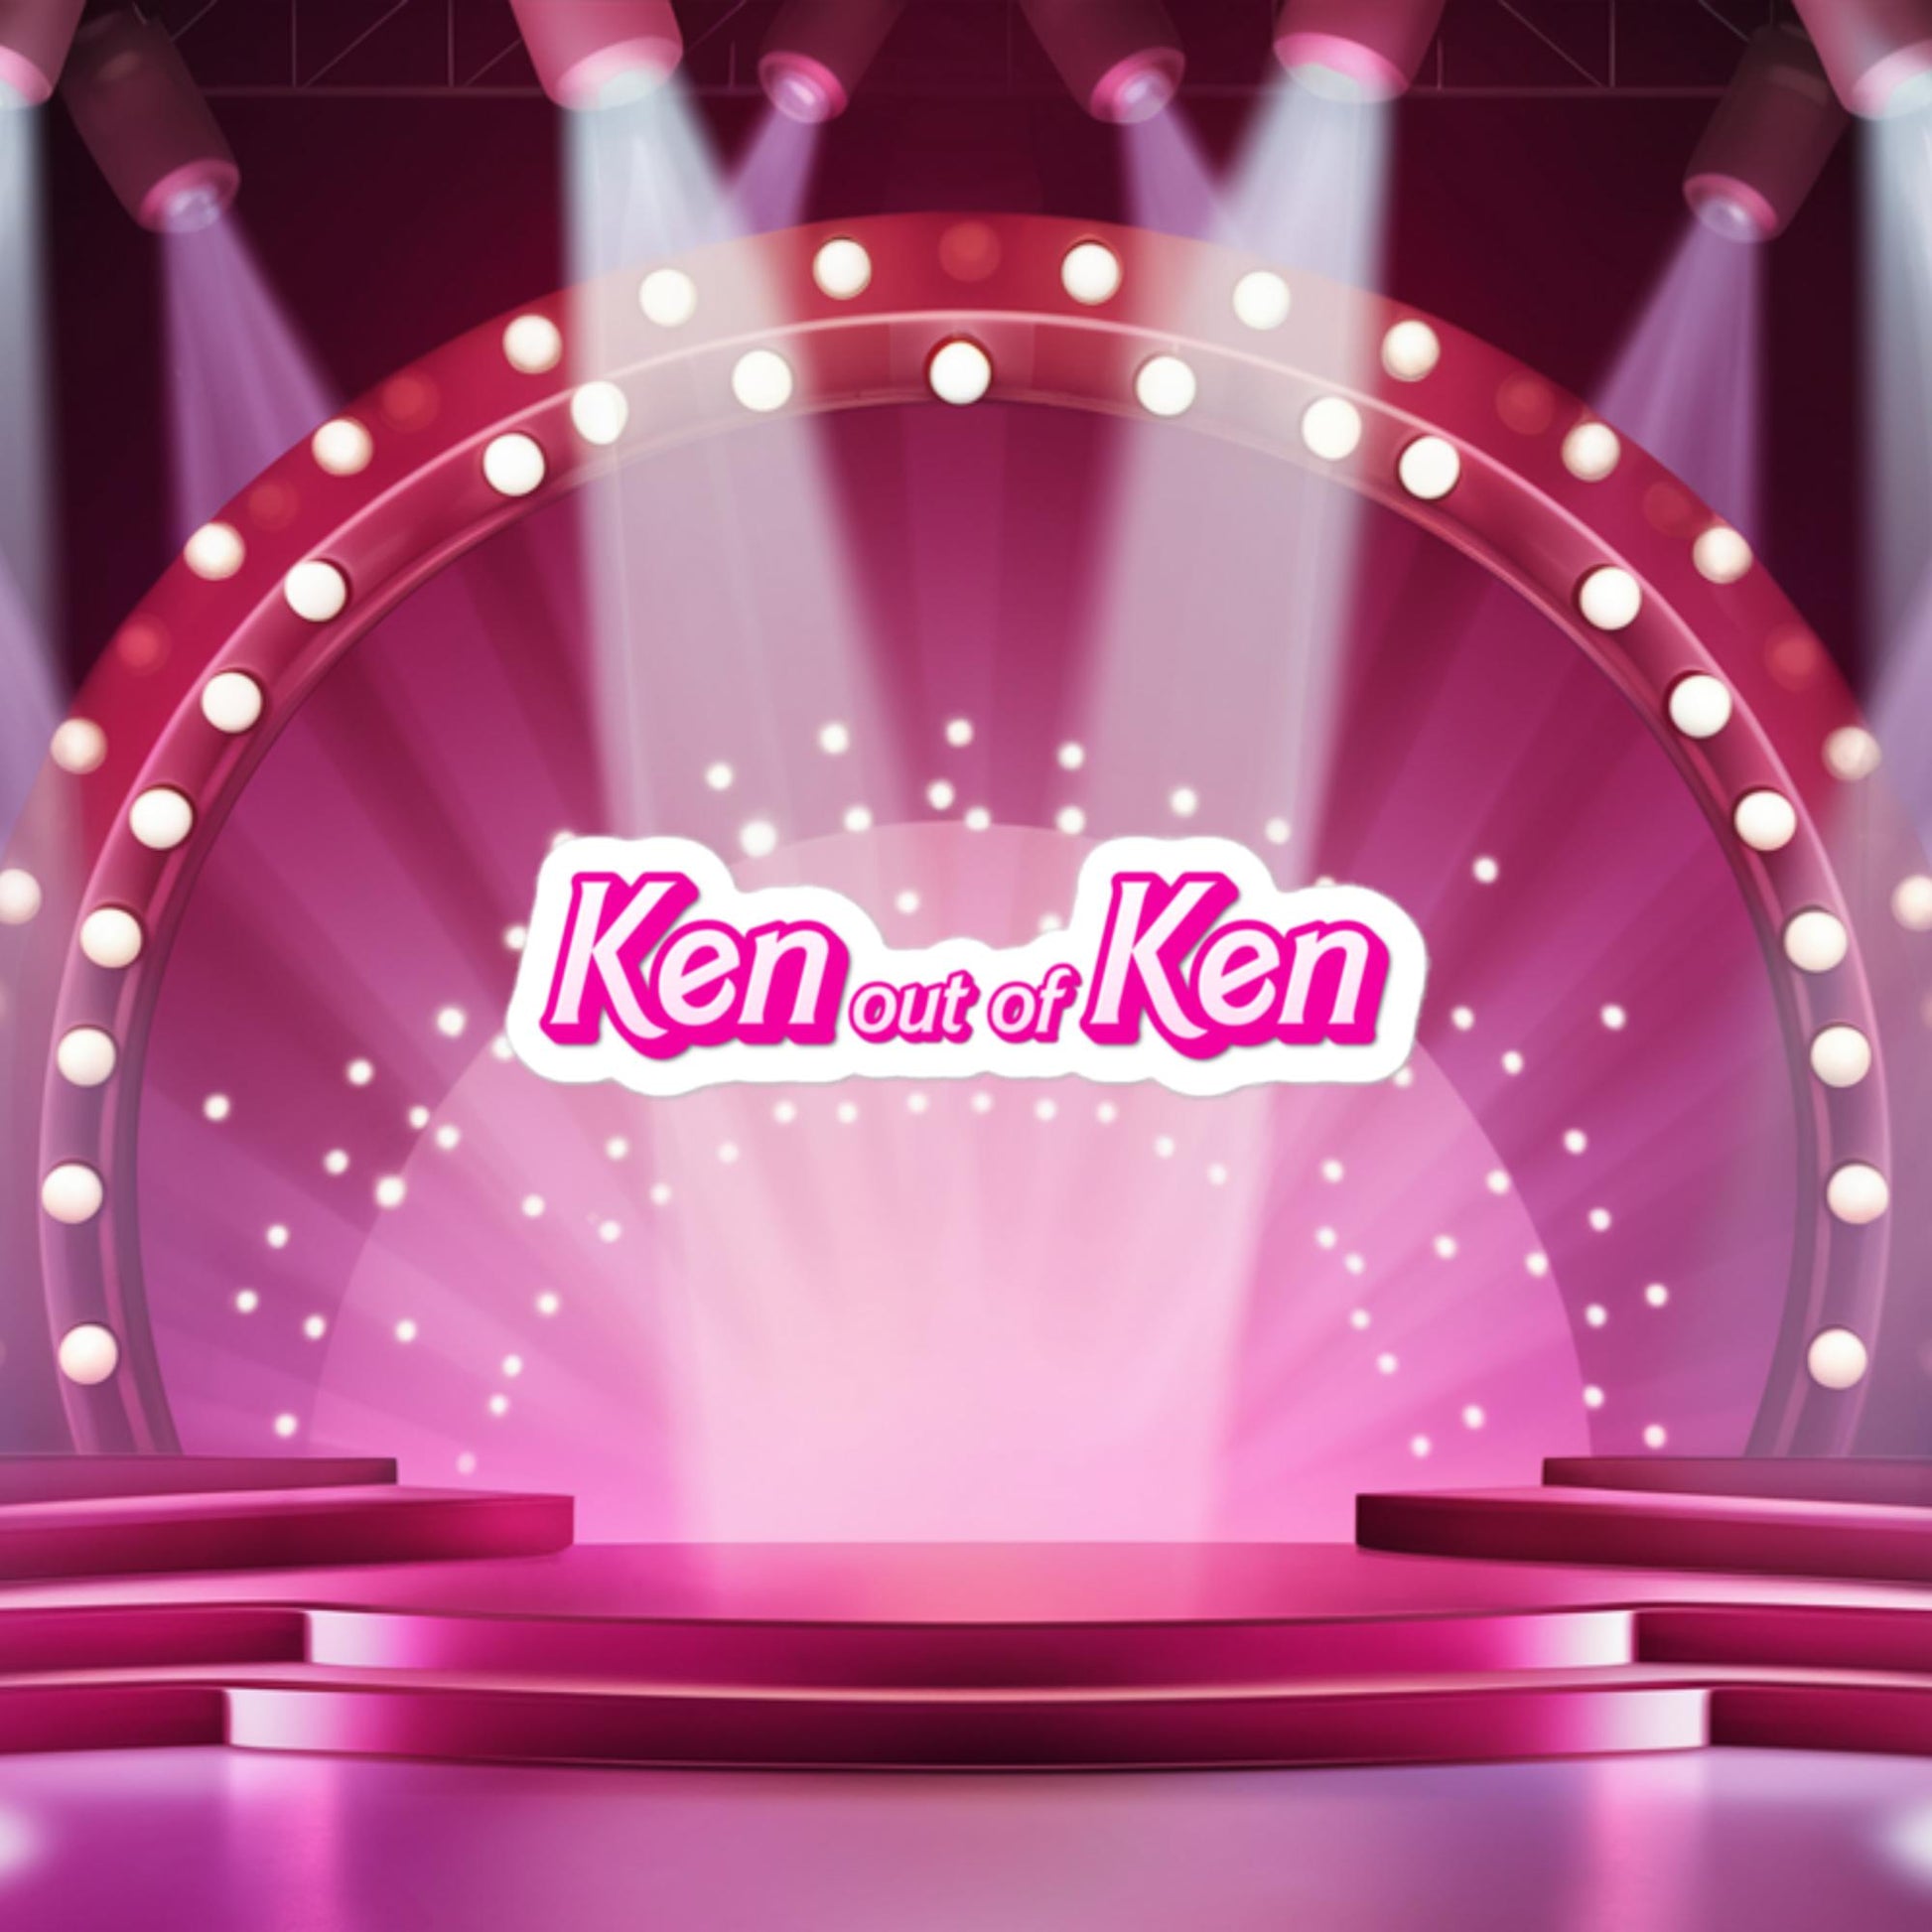 Ken out of Ken Barbie Movie Bubble-free stickers Next Cult Brand